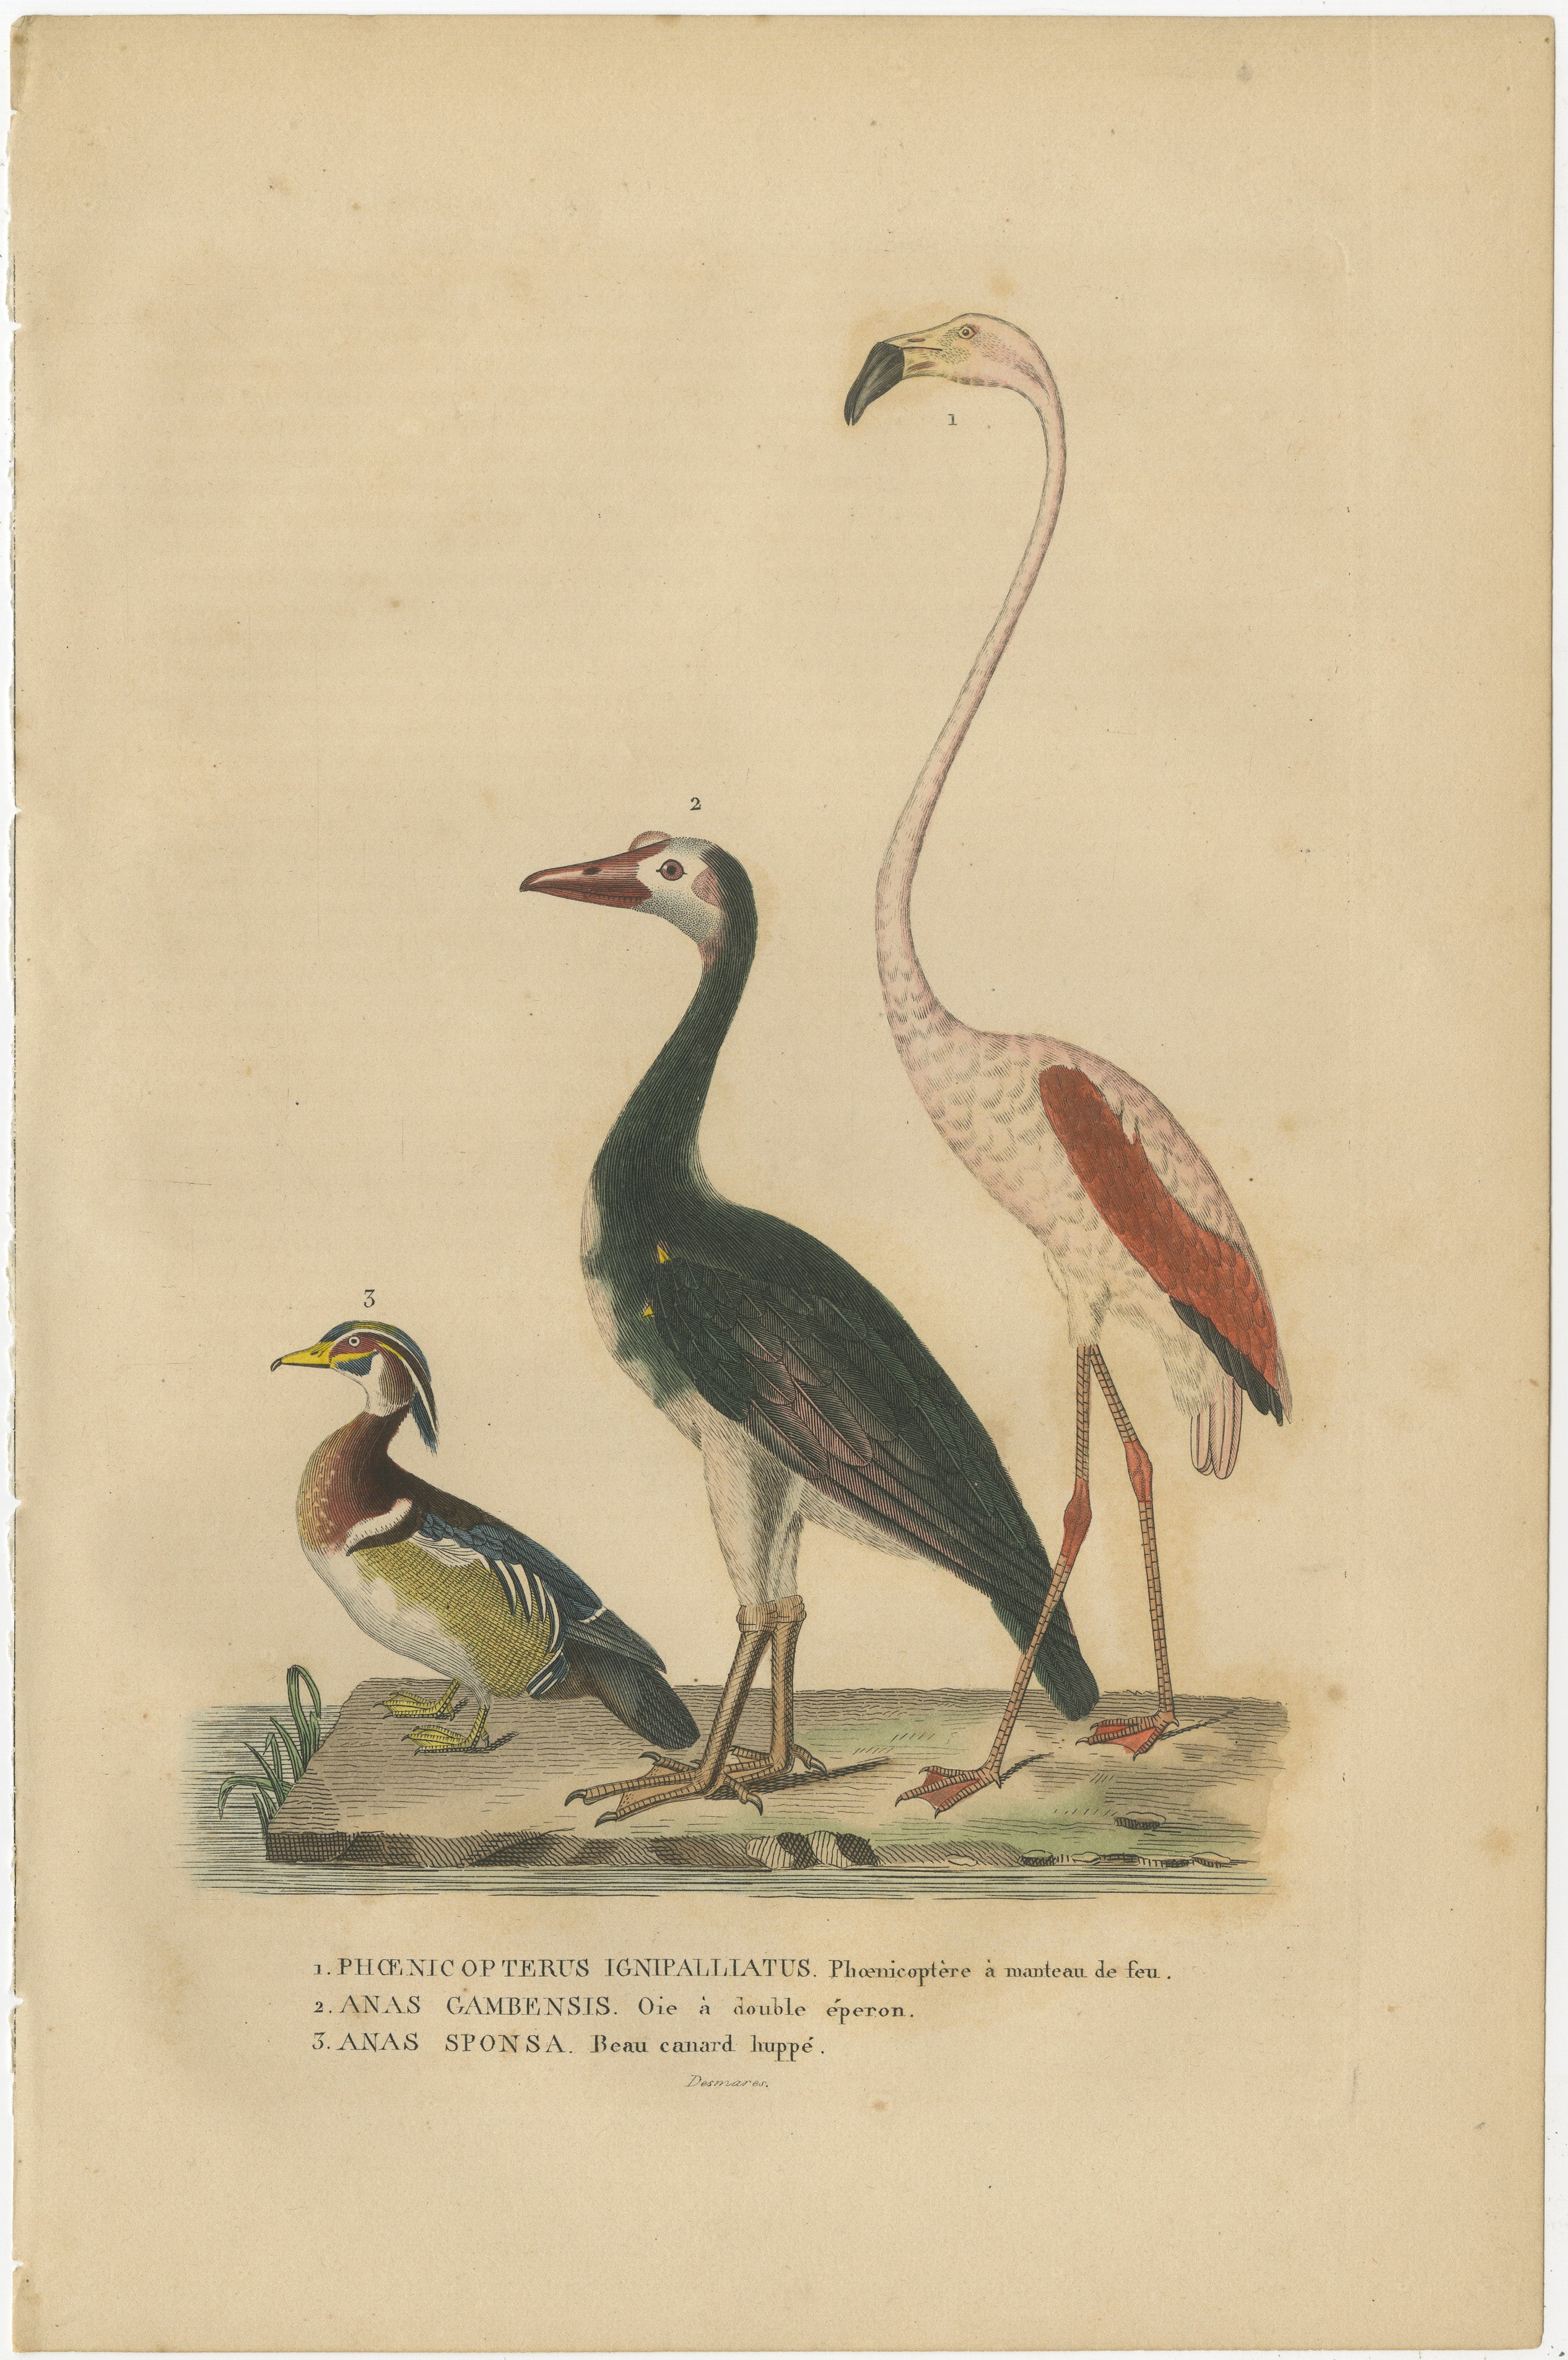 The English names for the birds on the antique hand-colored bird print are:

Phoenicopterus ruber ruber - Caribbean Flamingo
Anas gambensis - African Pygmy Goose
Anas sponsa - Wood Duck

More info on the book in which it was published:

The